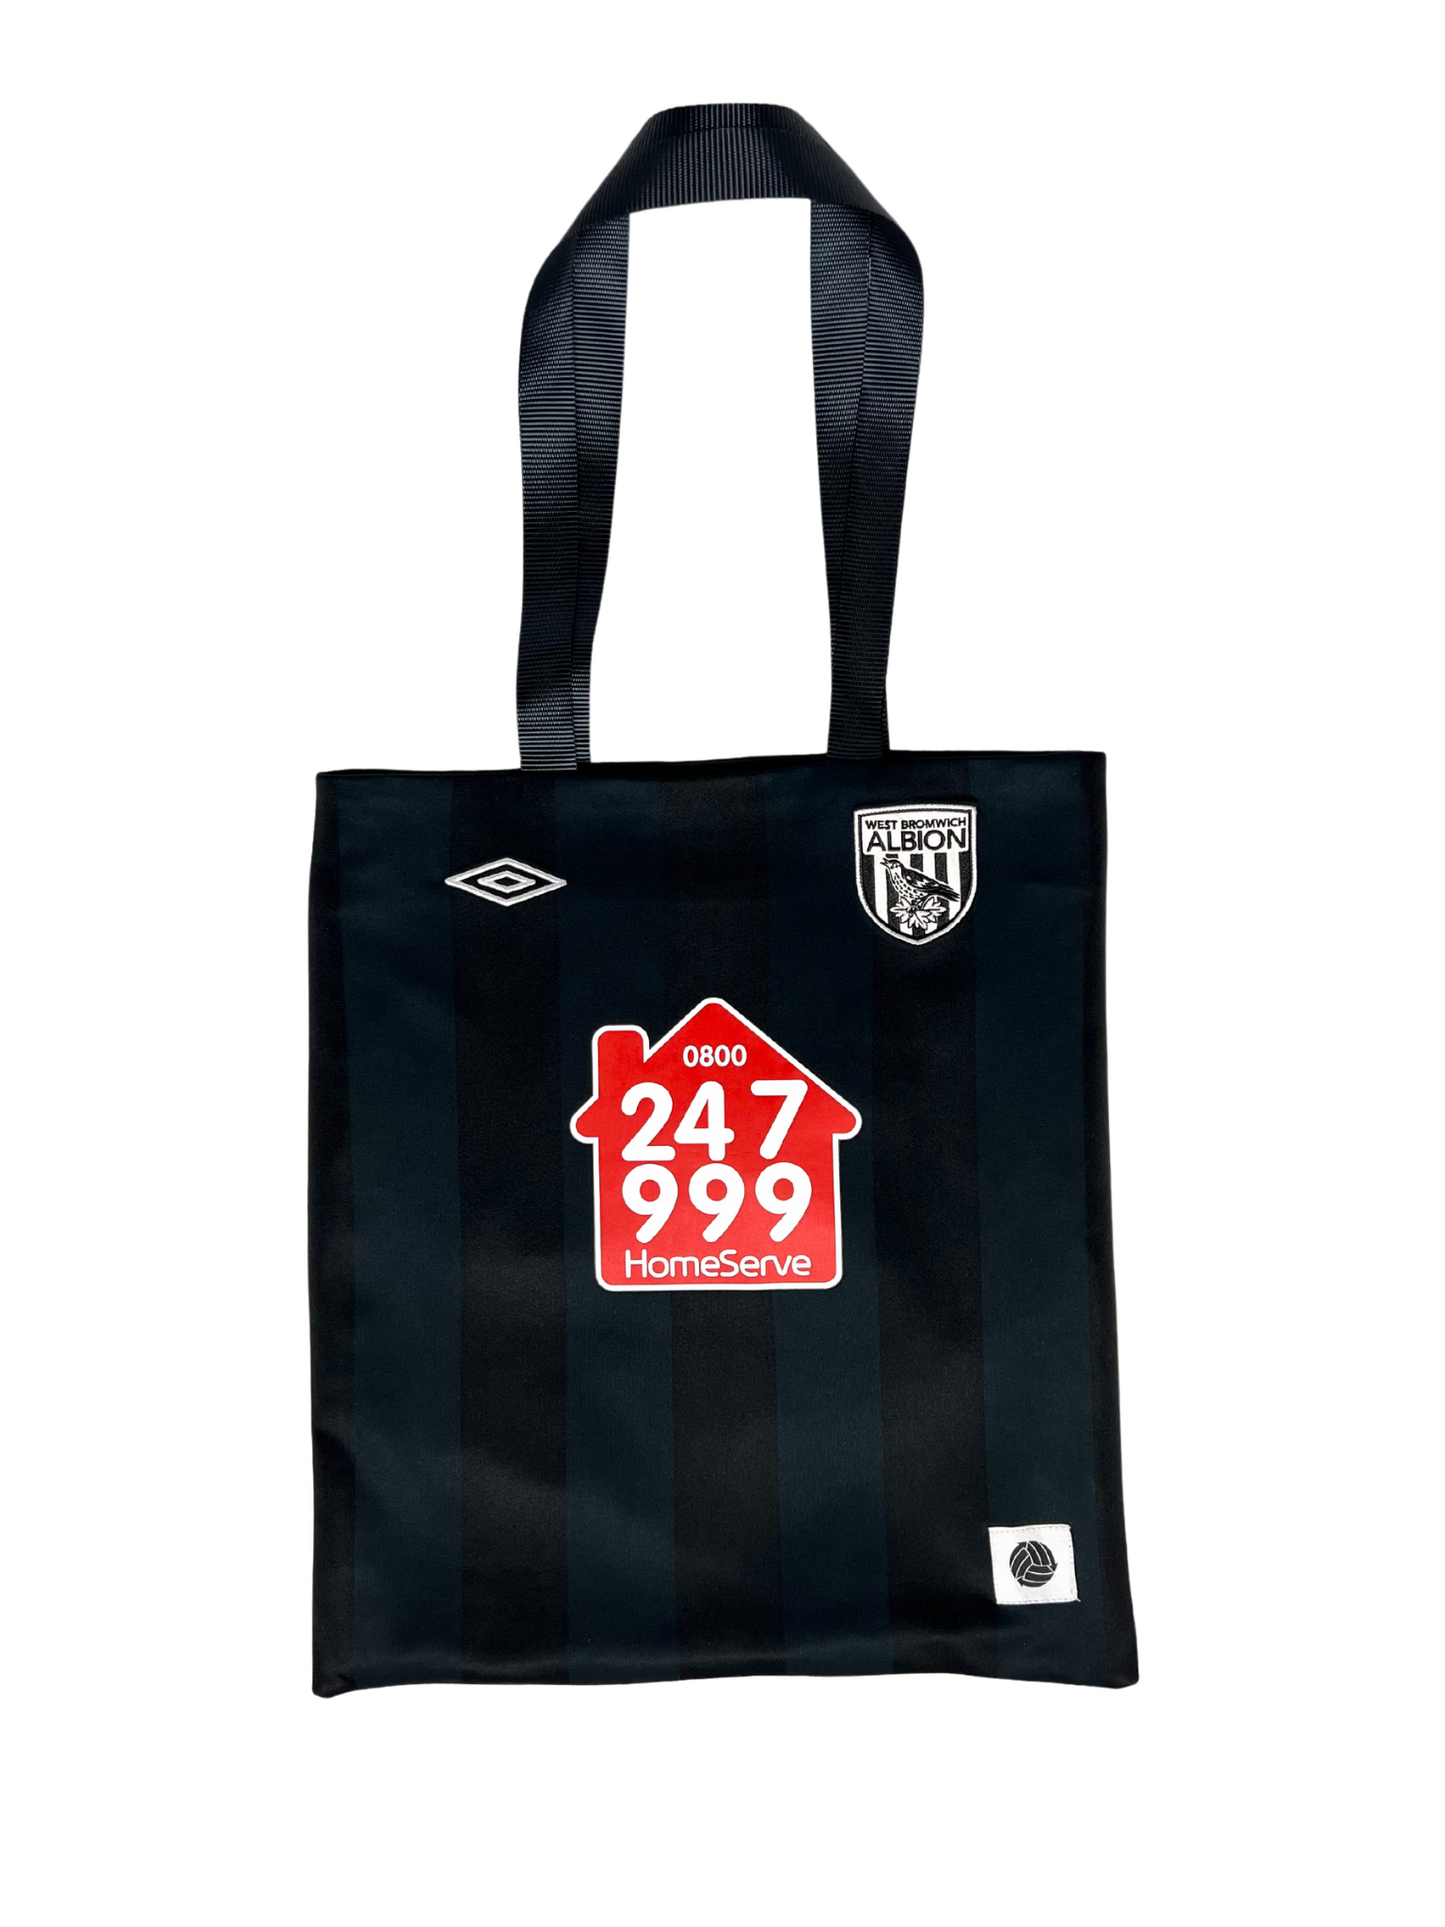 West Bromwich Albion Tote Bag